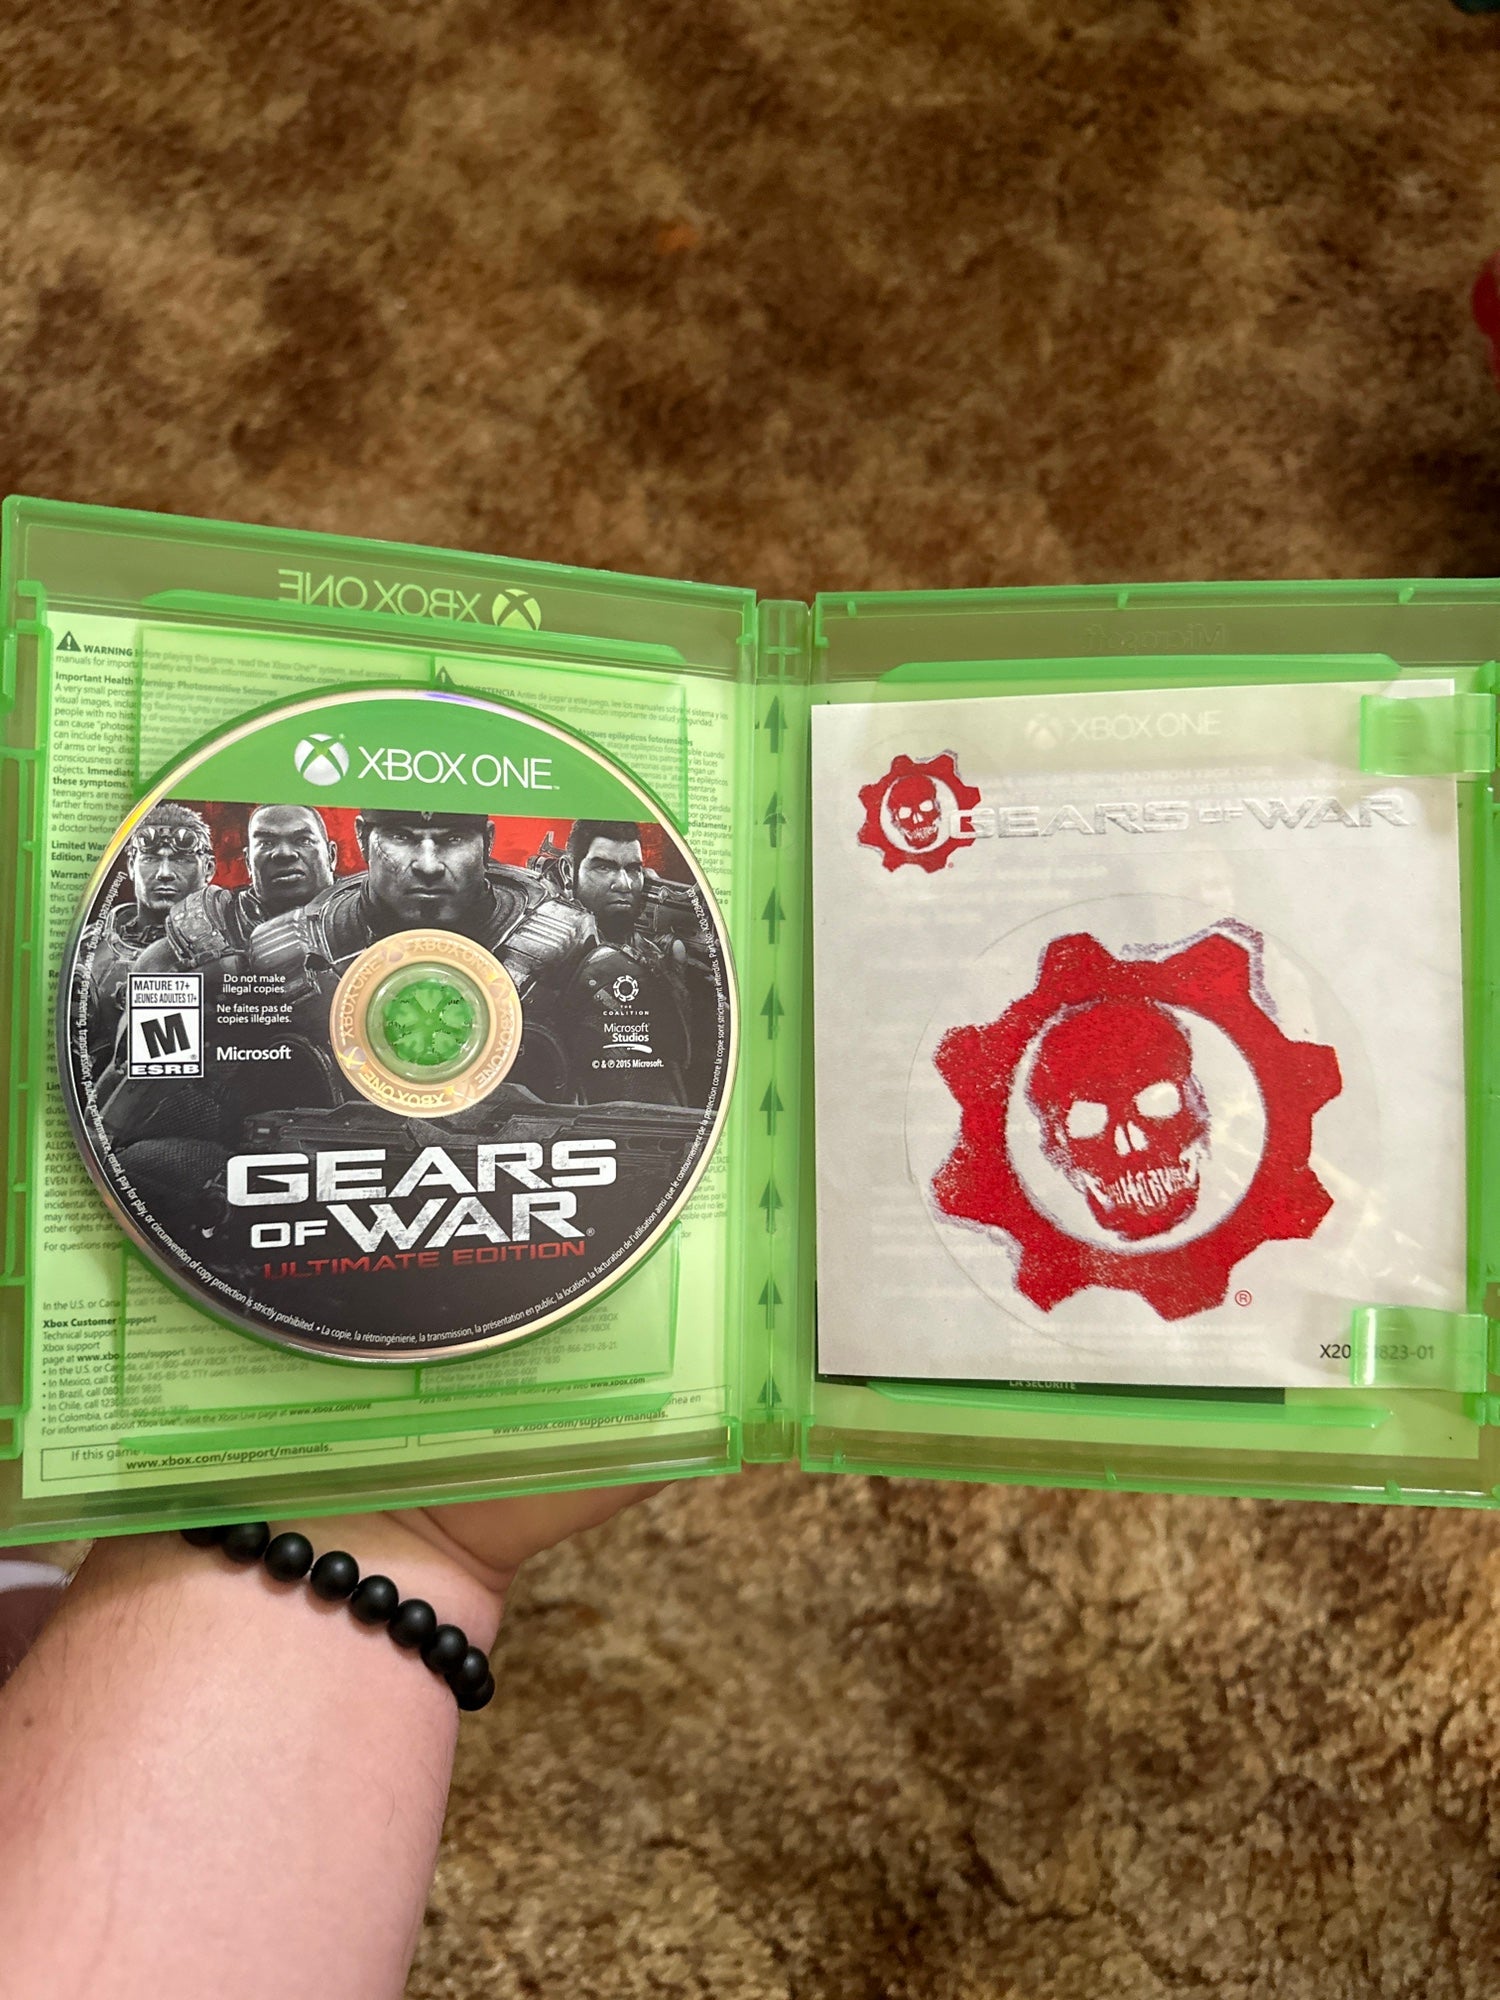 Gears of War - Ultimate Edition + Rare Replay Double Pack